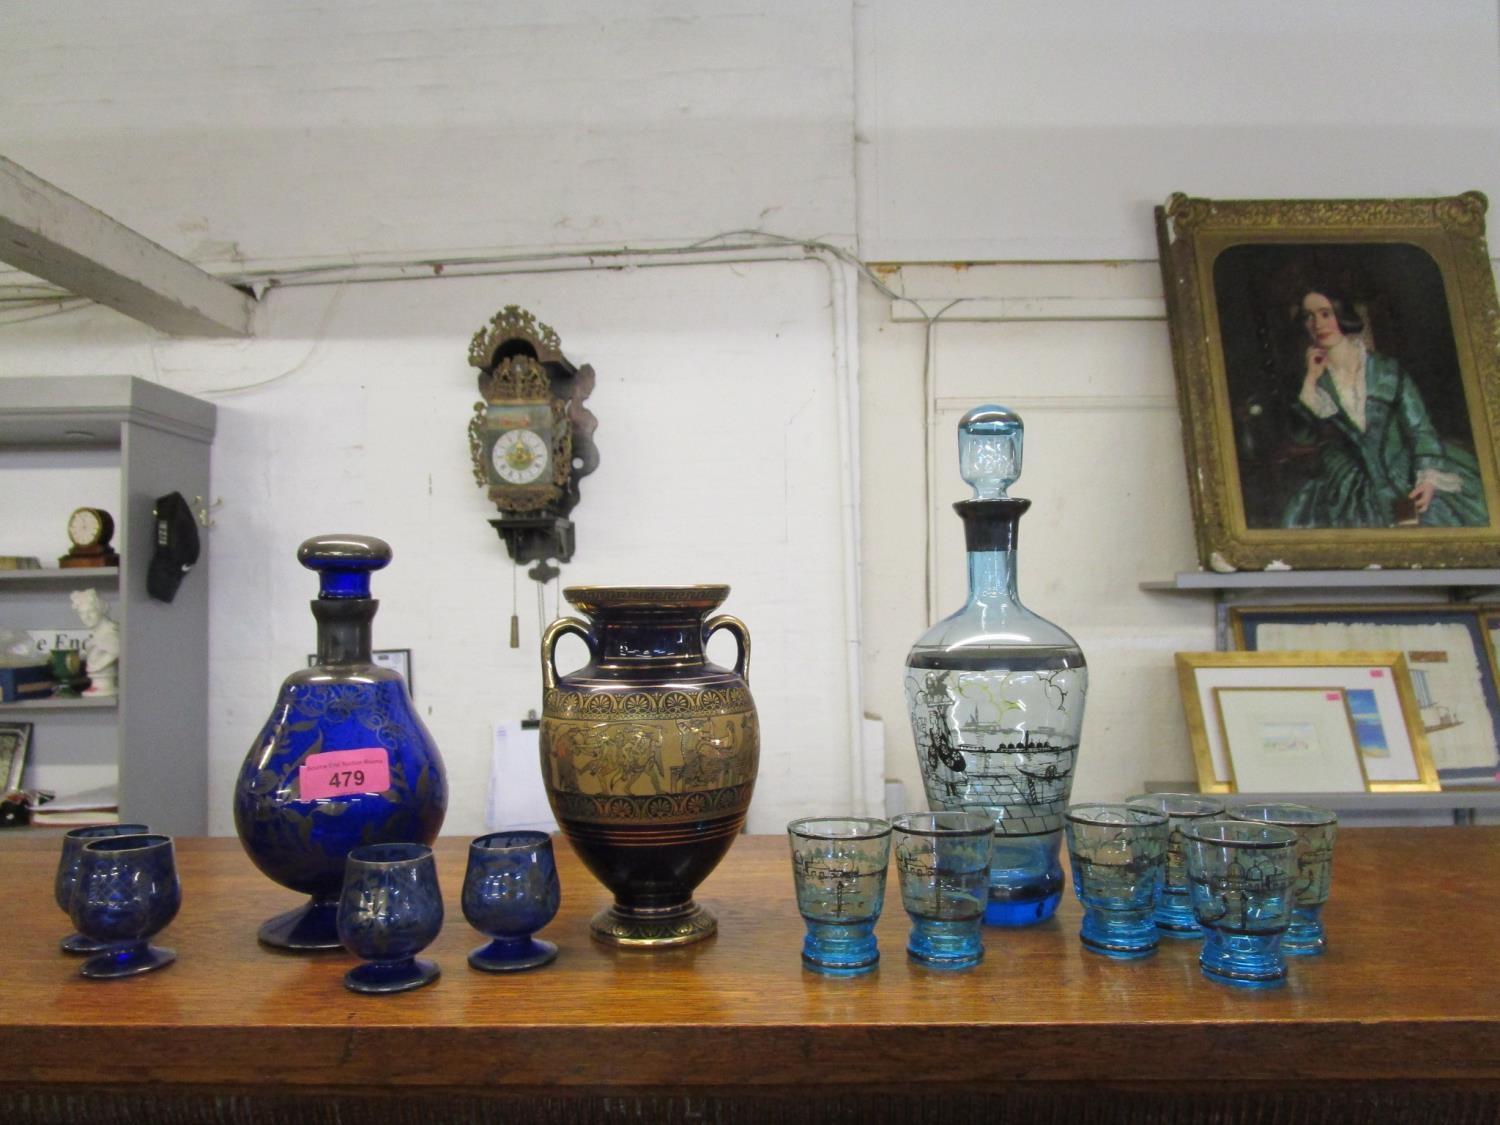 Two Venetian glass decanter sets, one with four glasses and the other six, along with a Greek vase